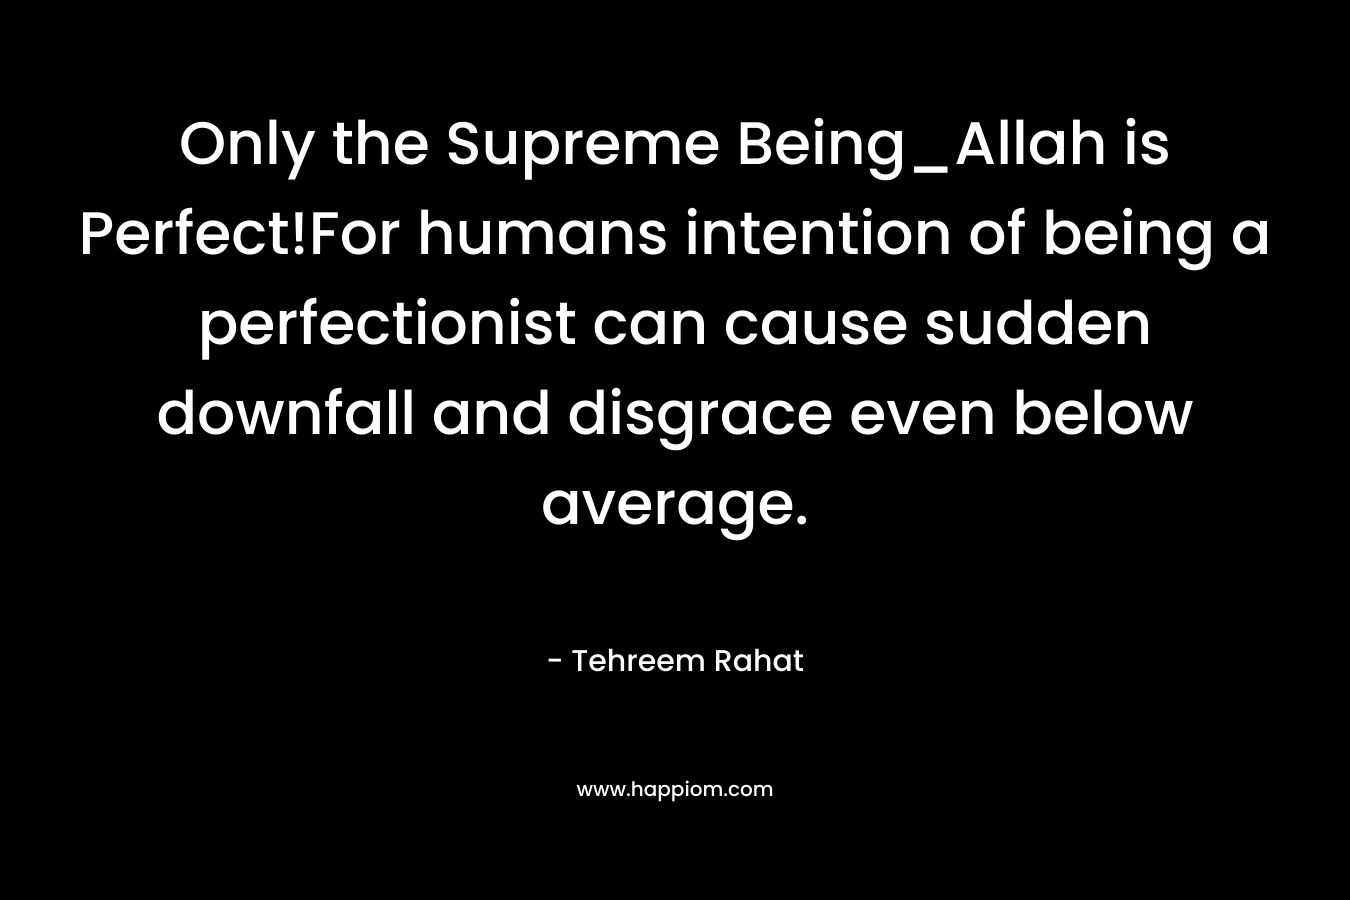 Only the Supreme Being_Allah is Perfect!For humans intention of being a perfectionist can cause sudden downfall and disgrace even below average. – Tehreem Rahat